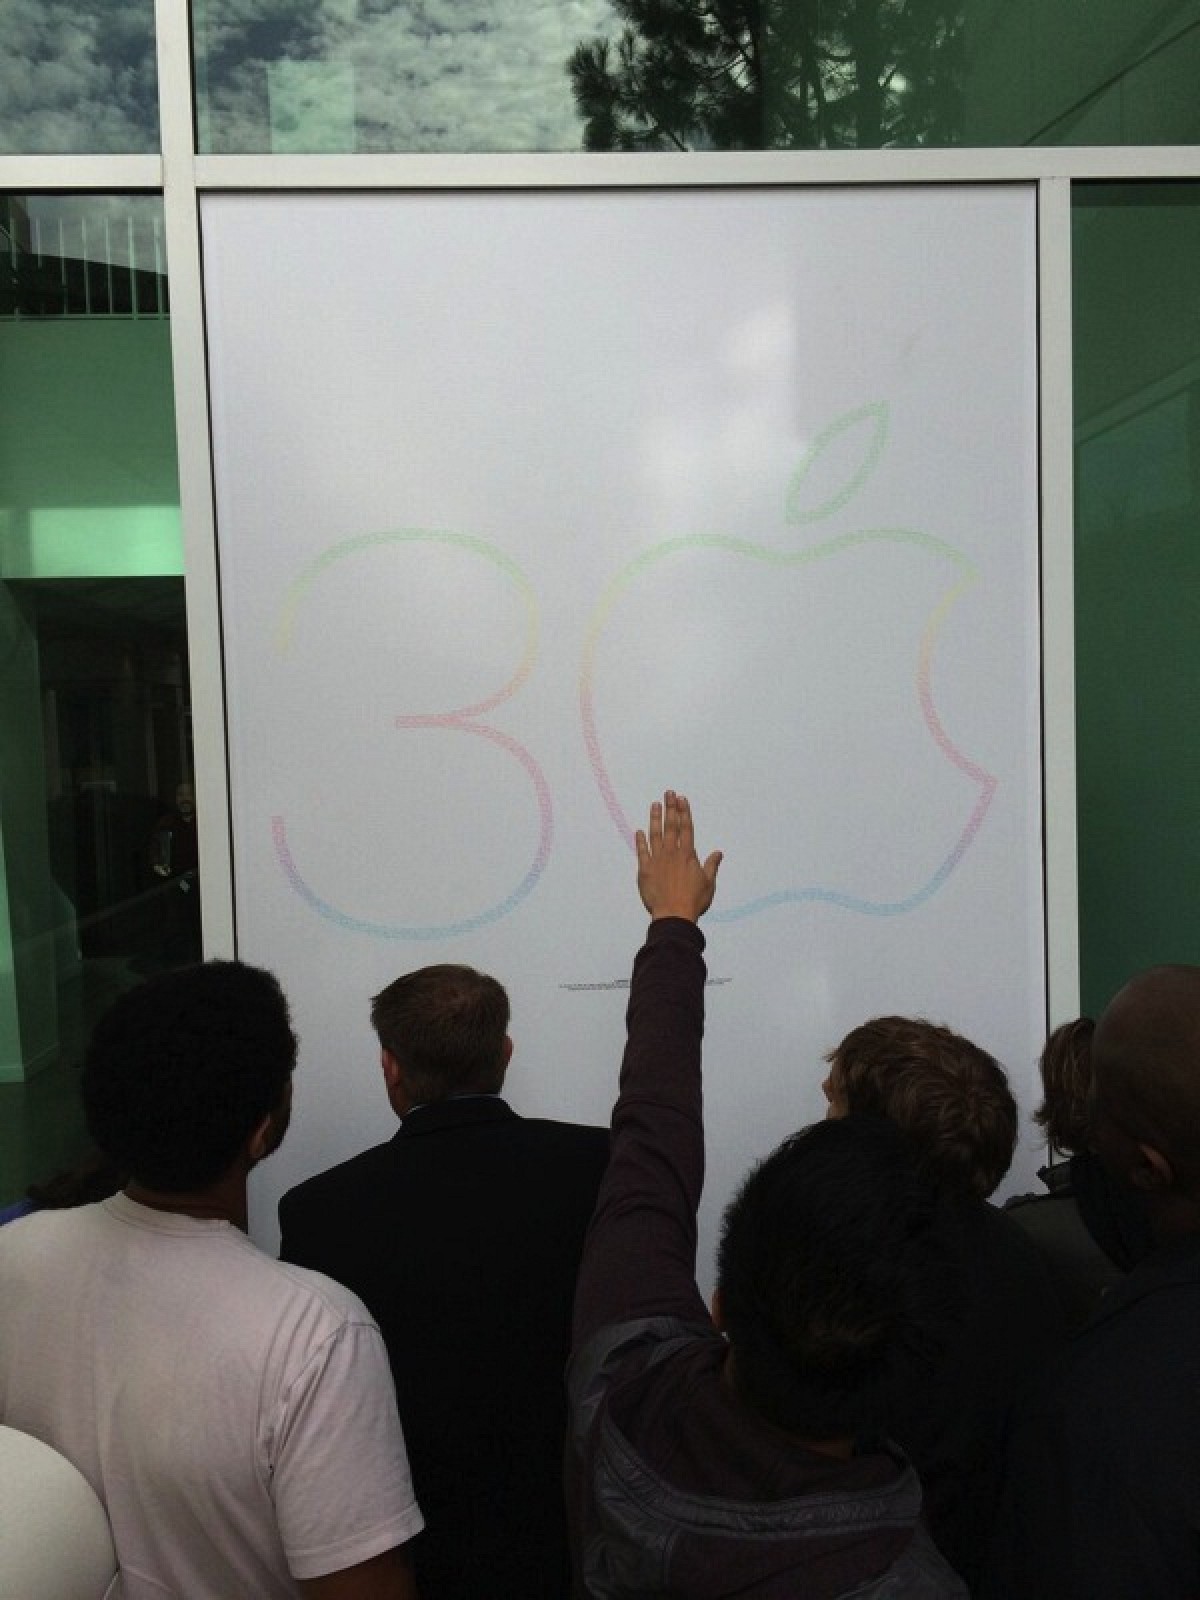 Commemorative Posters at Apple Campus List All Former and Current Apple